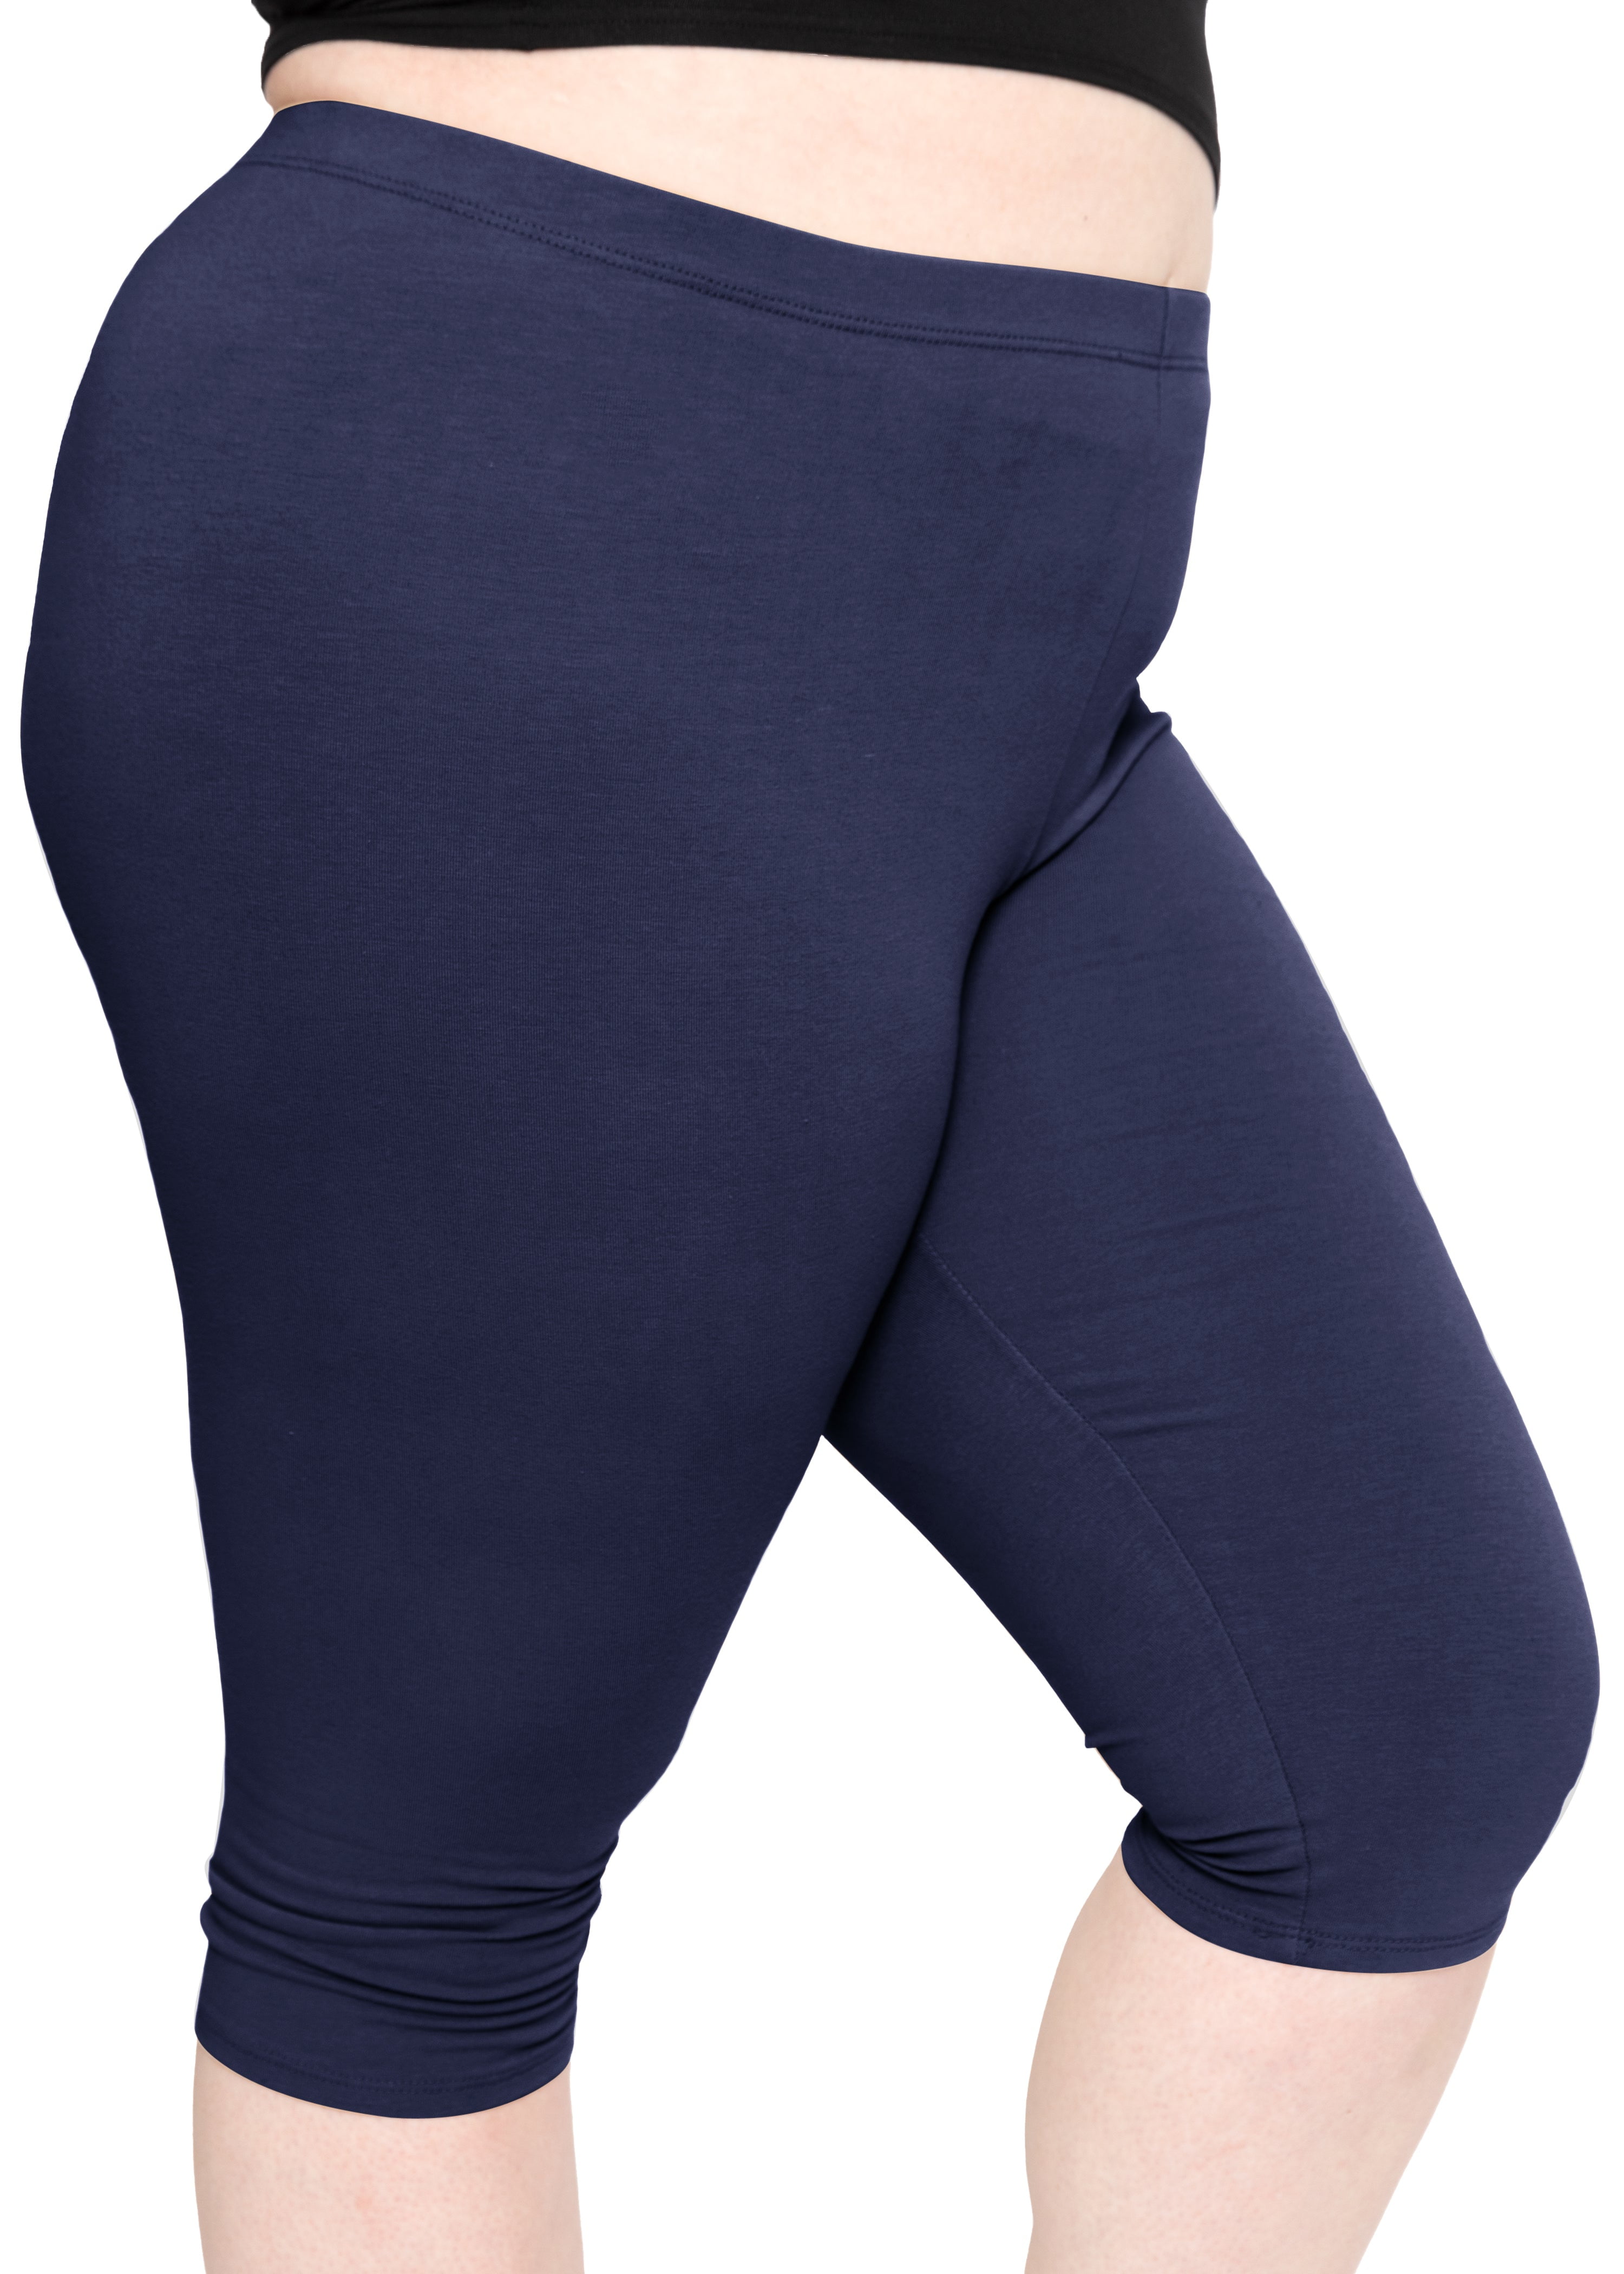 STRETCH IS COMFORT Women's Plus Size Leggings, Stretchy, X-Large - 7X